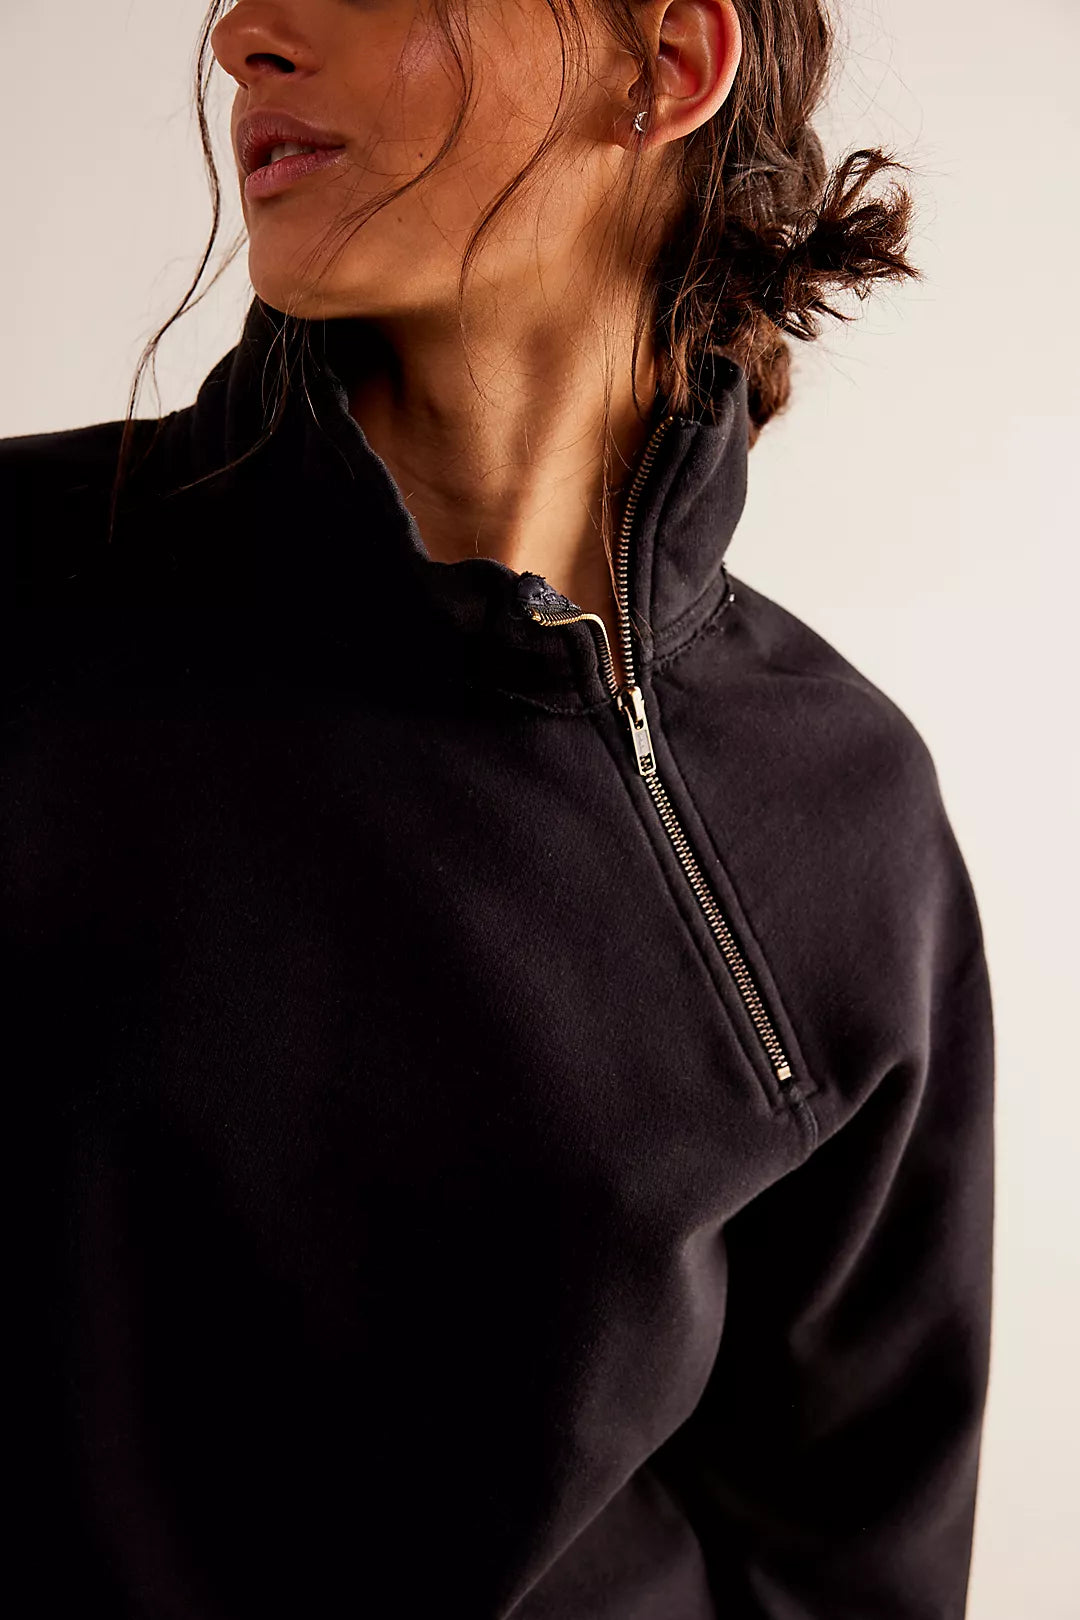 Free People: Just a Game 1/2 Zip - Washed Black